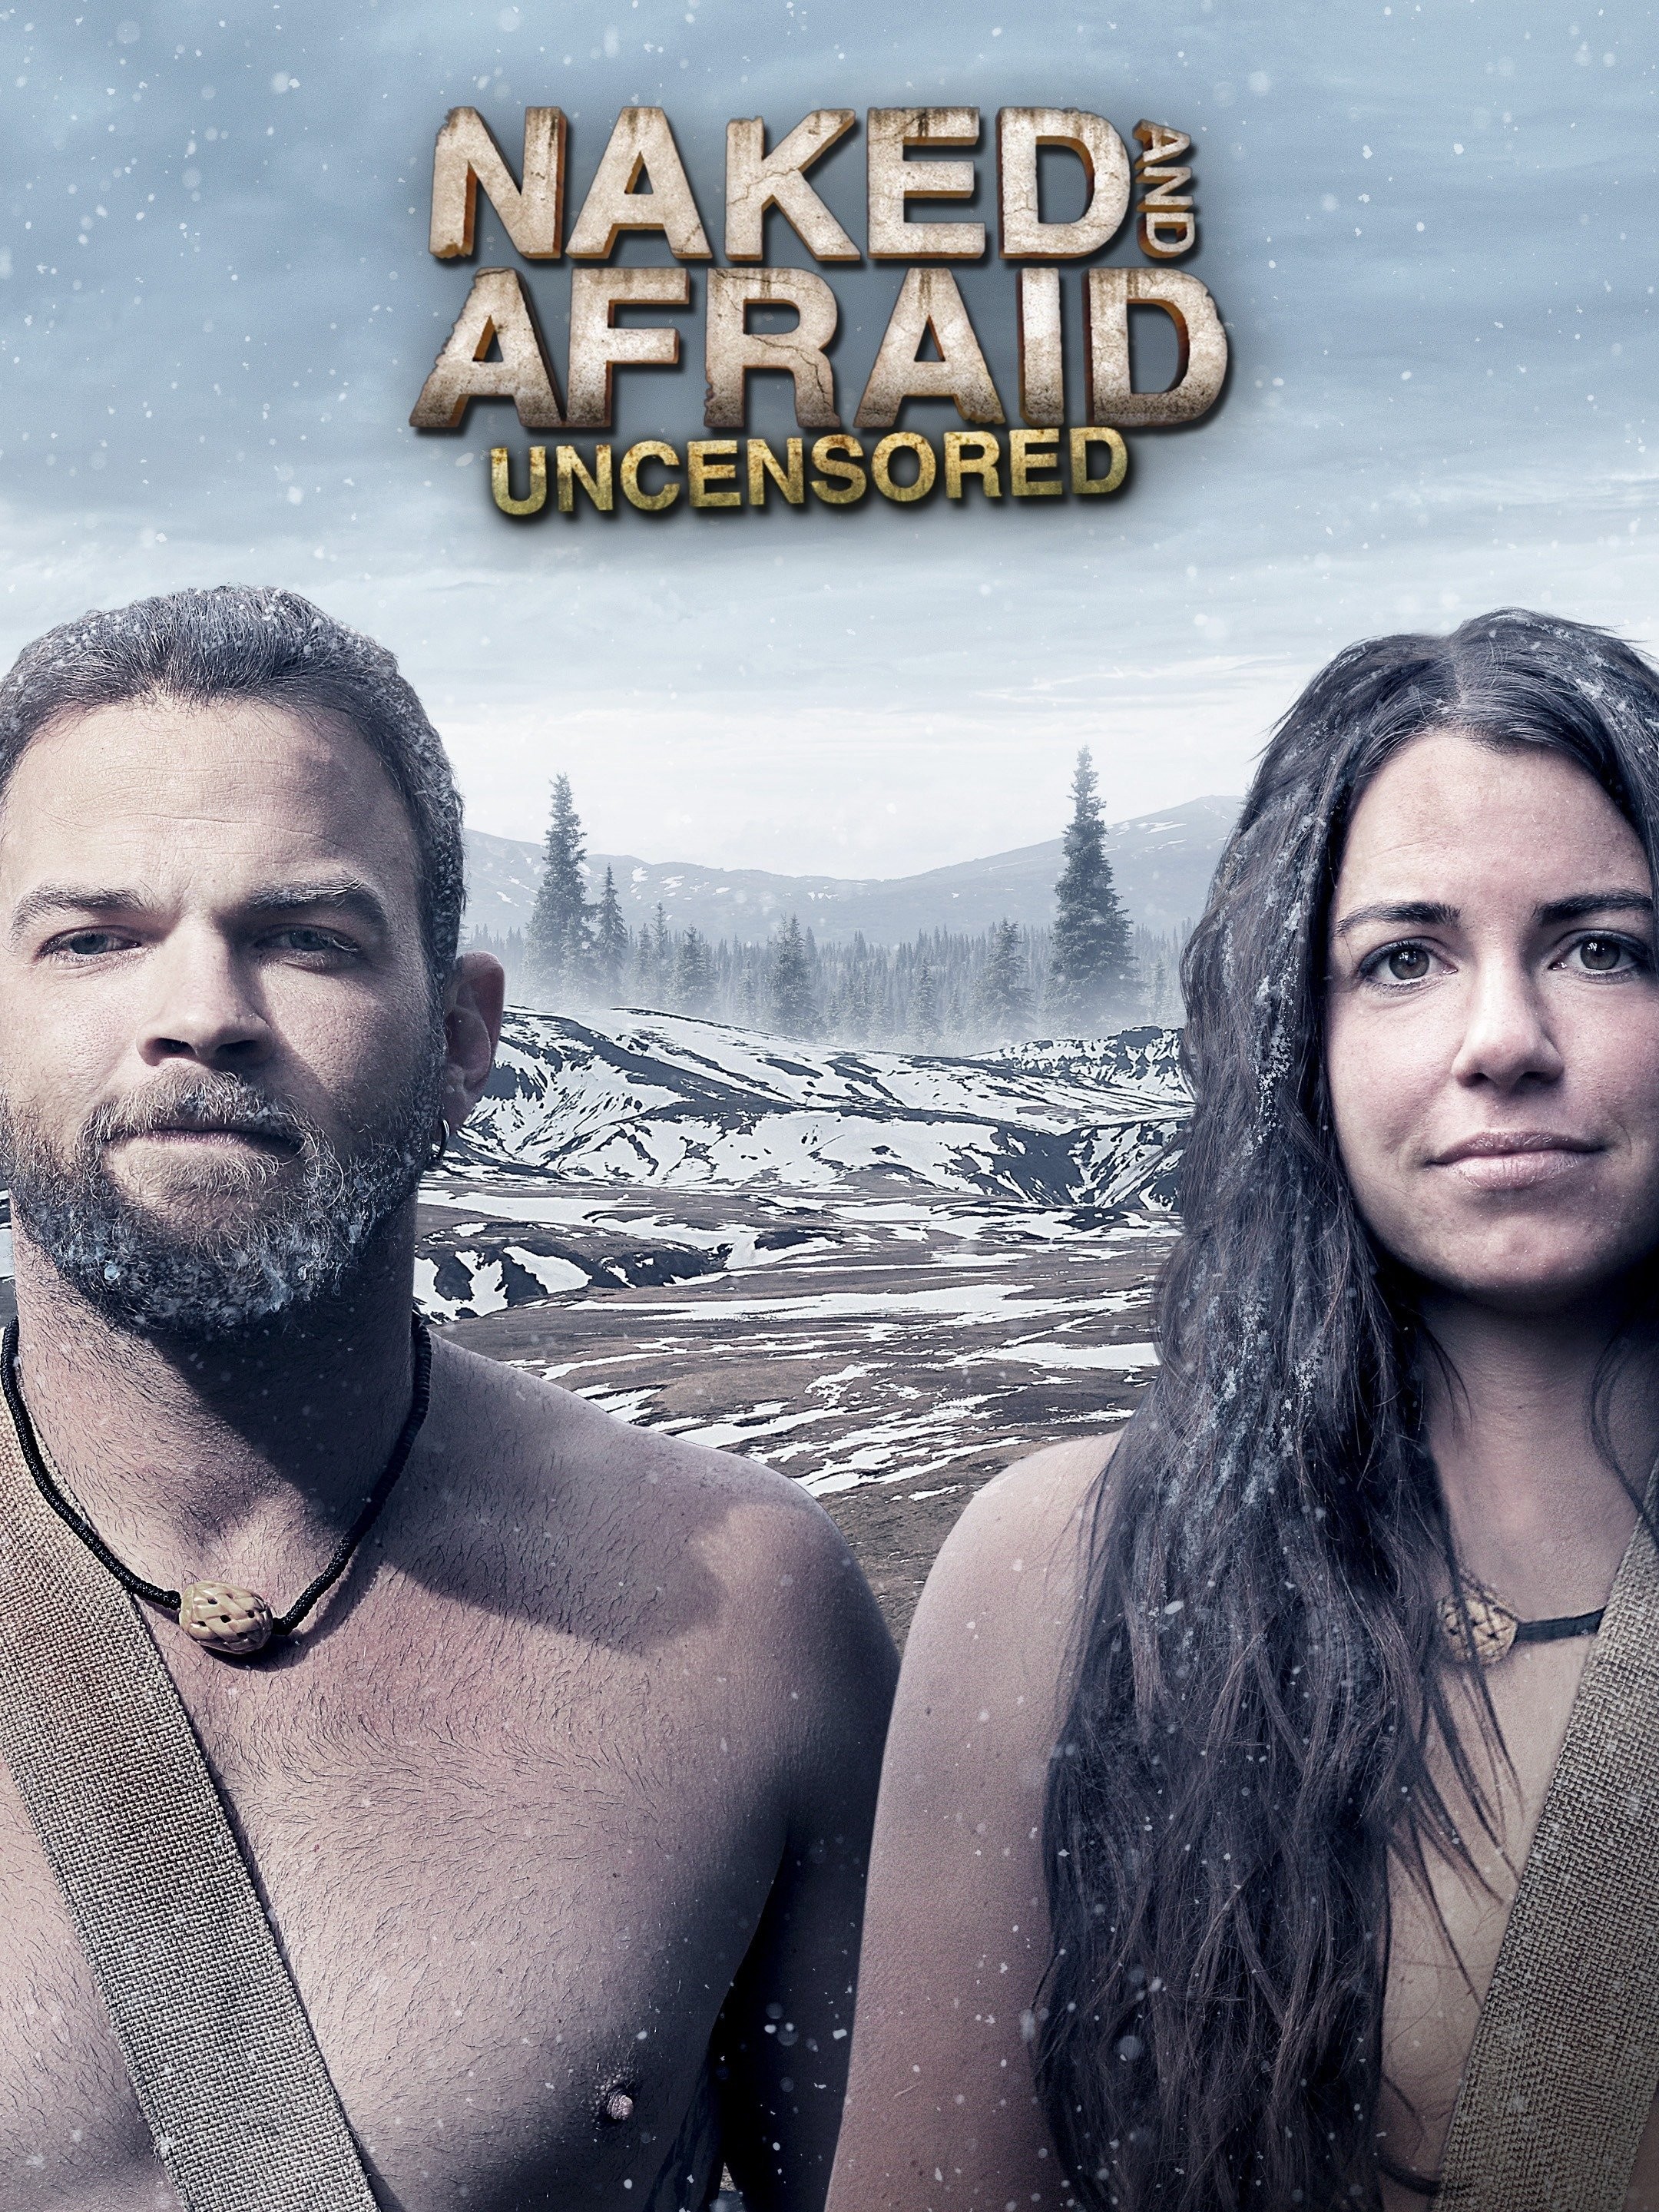 barbara suto recommends Naked And Afraid Unsencerd